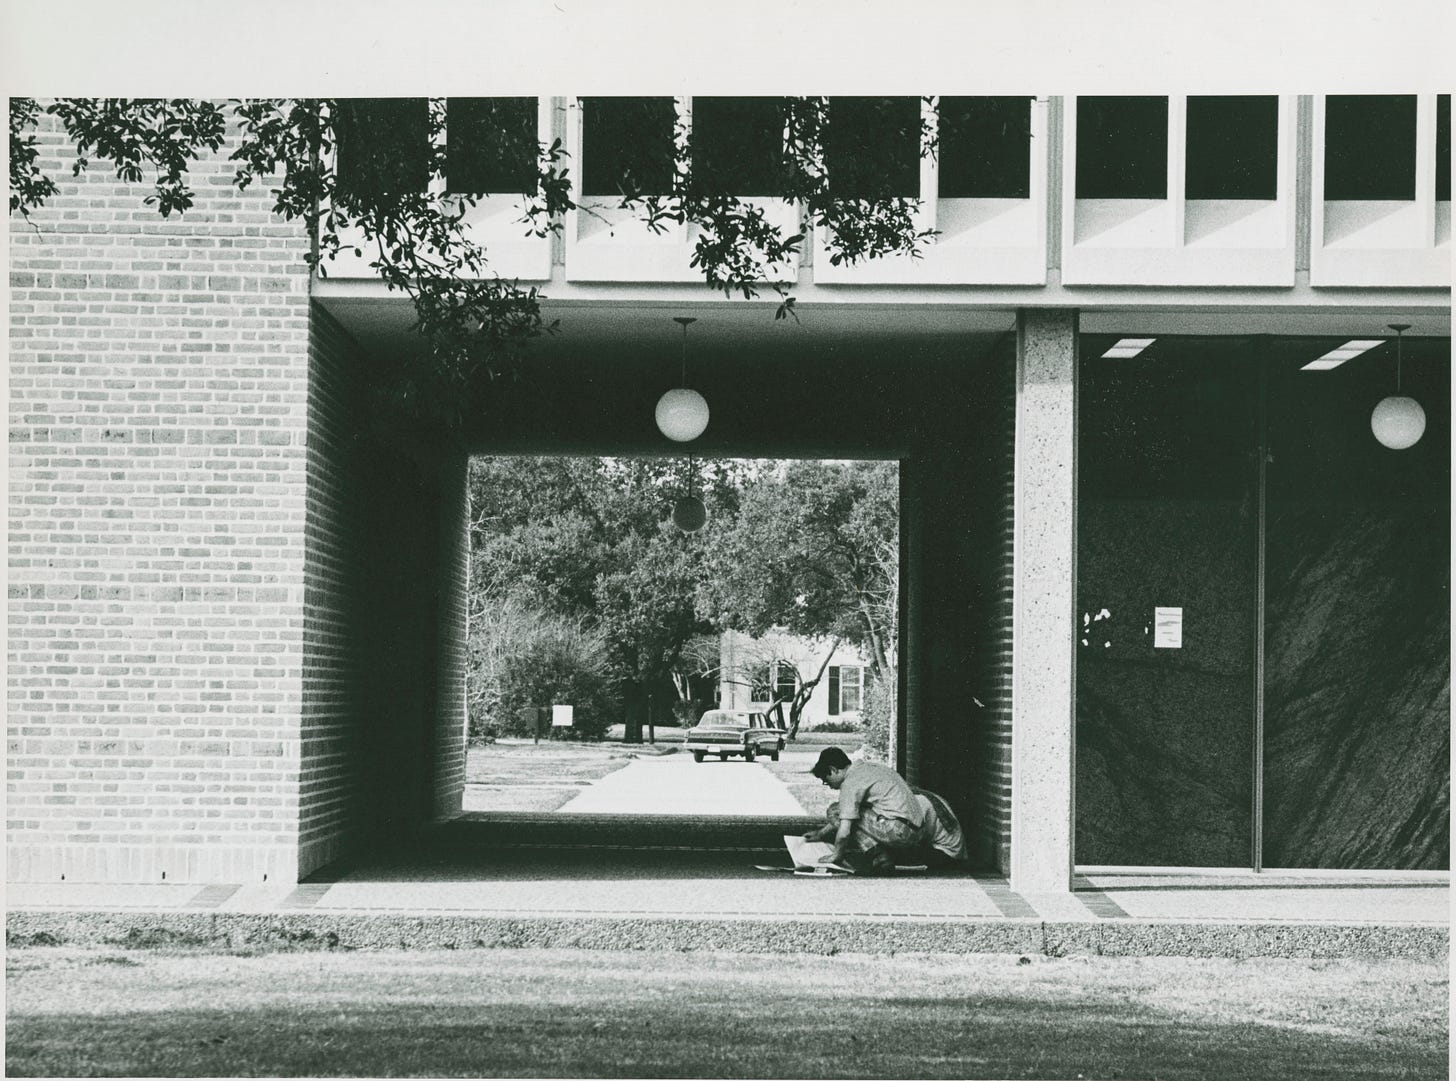 Black-and-white picture of the breezeway. The corridor is rectangular. There is a white 1960's-style globe light hanging from the ceiling. We can see a Ford Falcon through the breezeway, and a student is seated, studying